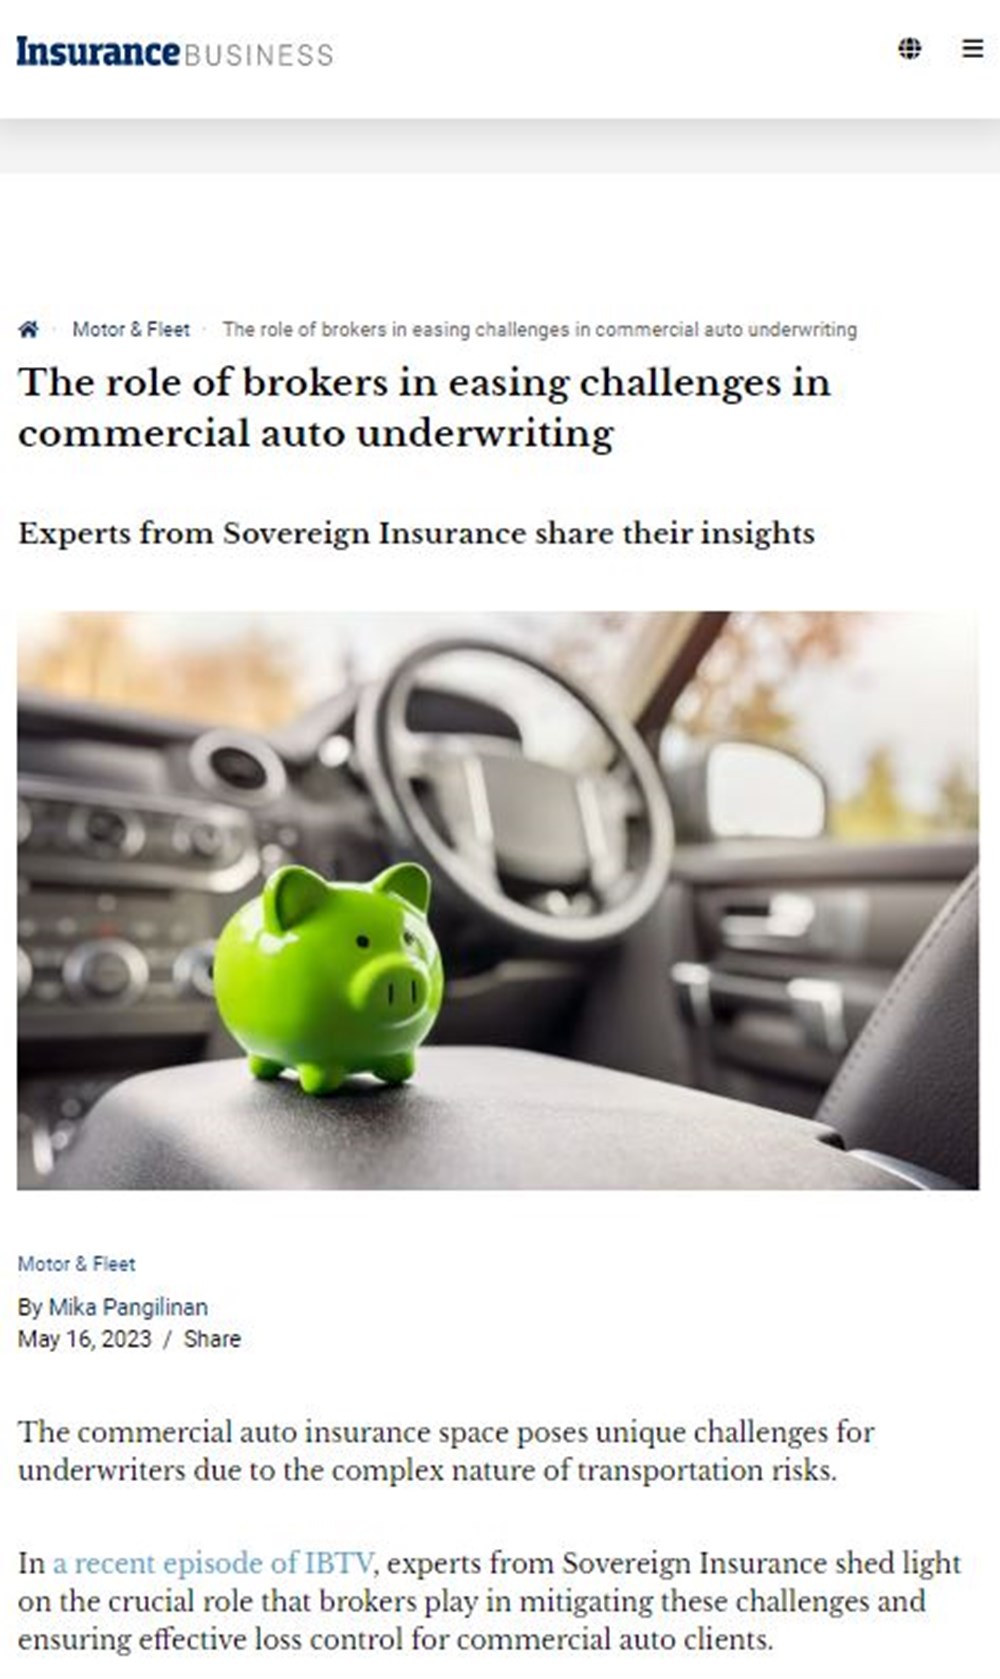 A screenshot of the article "the role of brokers in easing challenges in commercial auto underwriting" in Insurance Business Magazine.